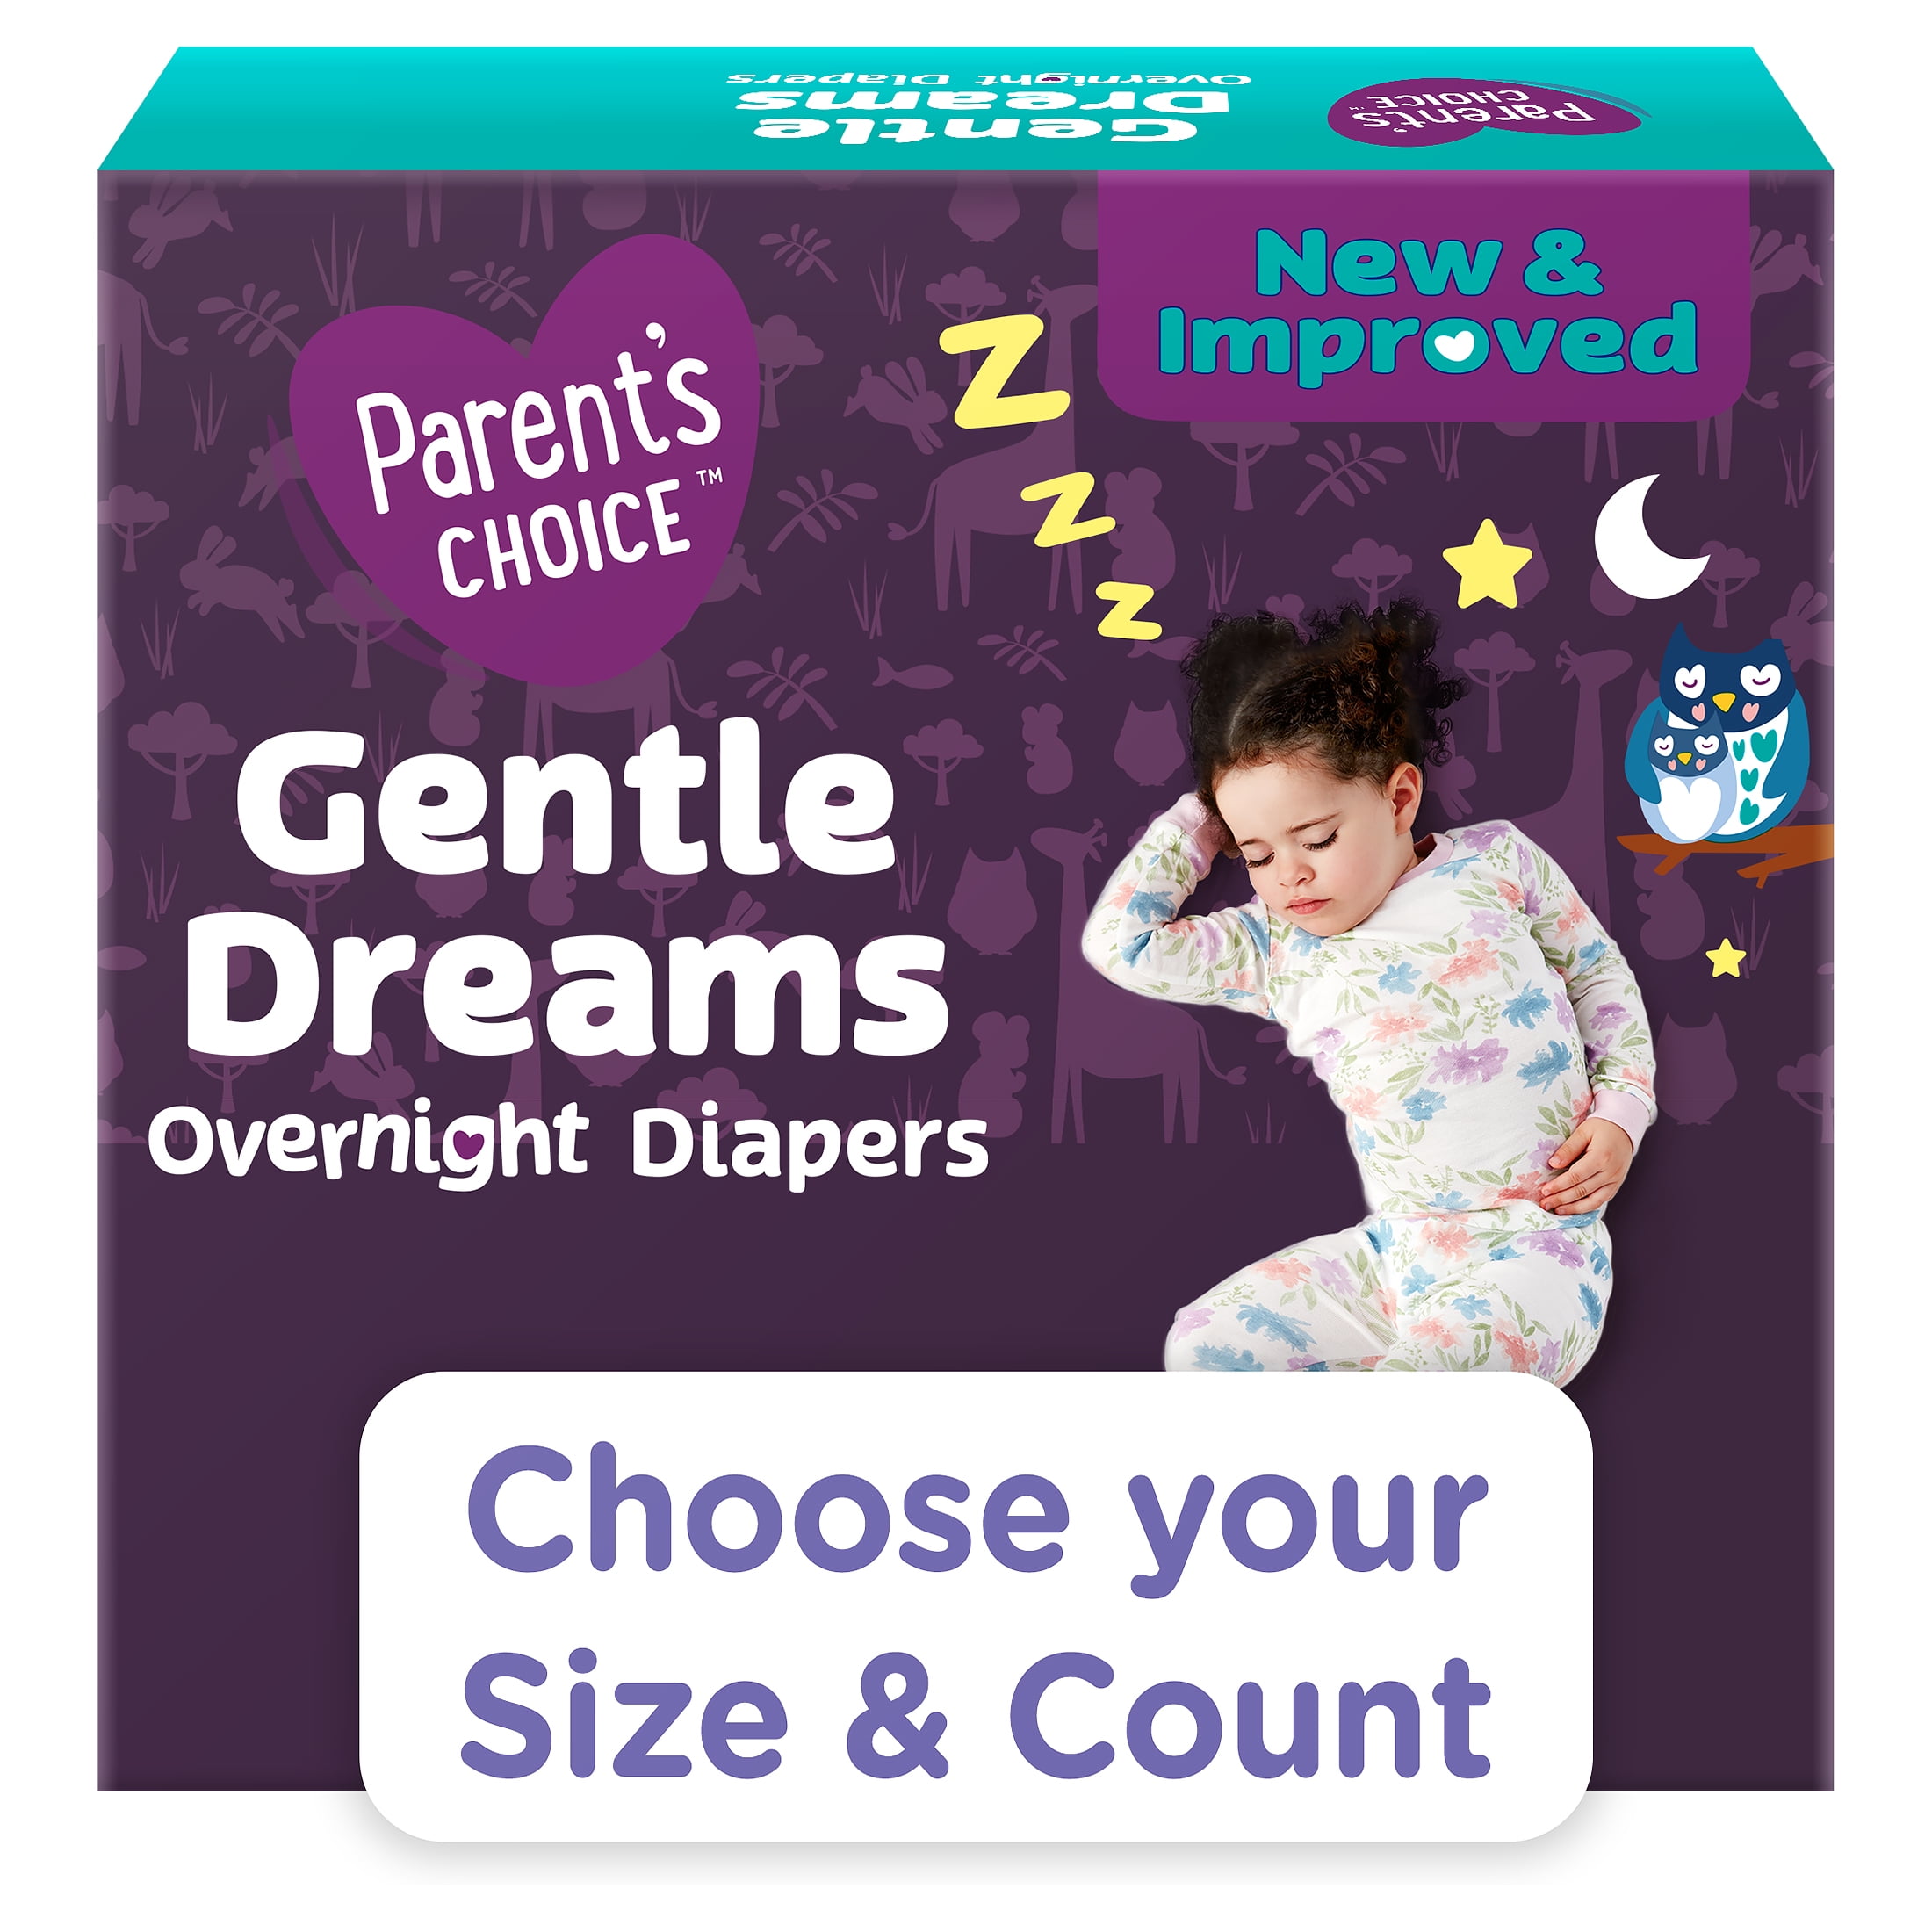 Parent's Choice Gentle Dreams Overnight Diapers (Choose Your Size & Count)